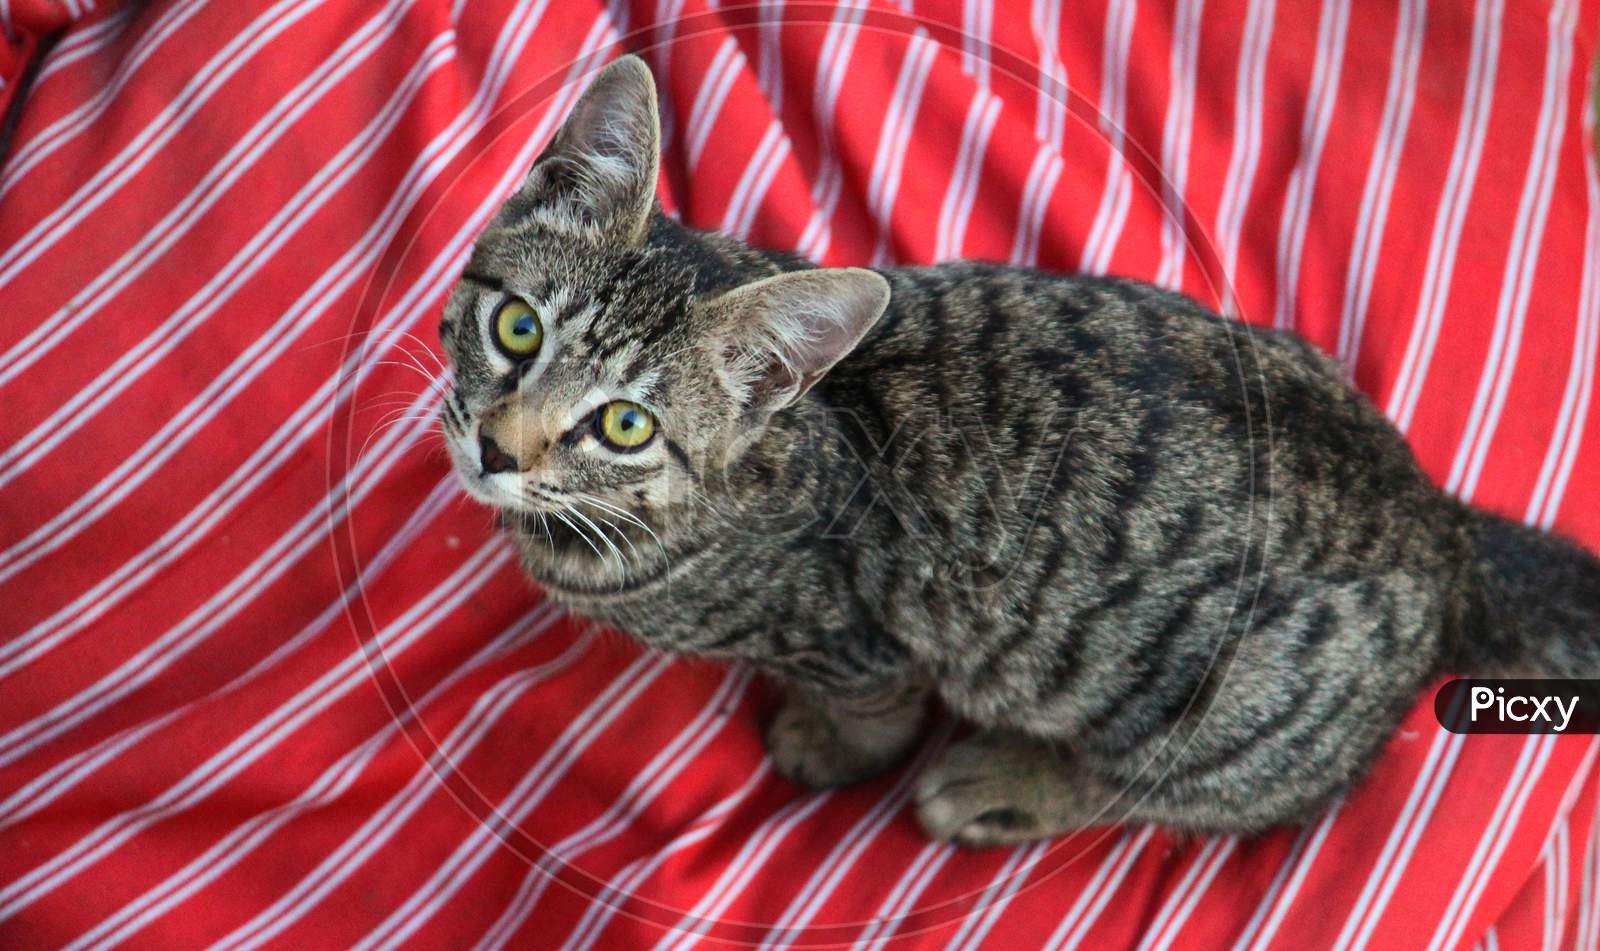 A Cat on red surface